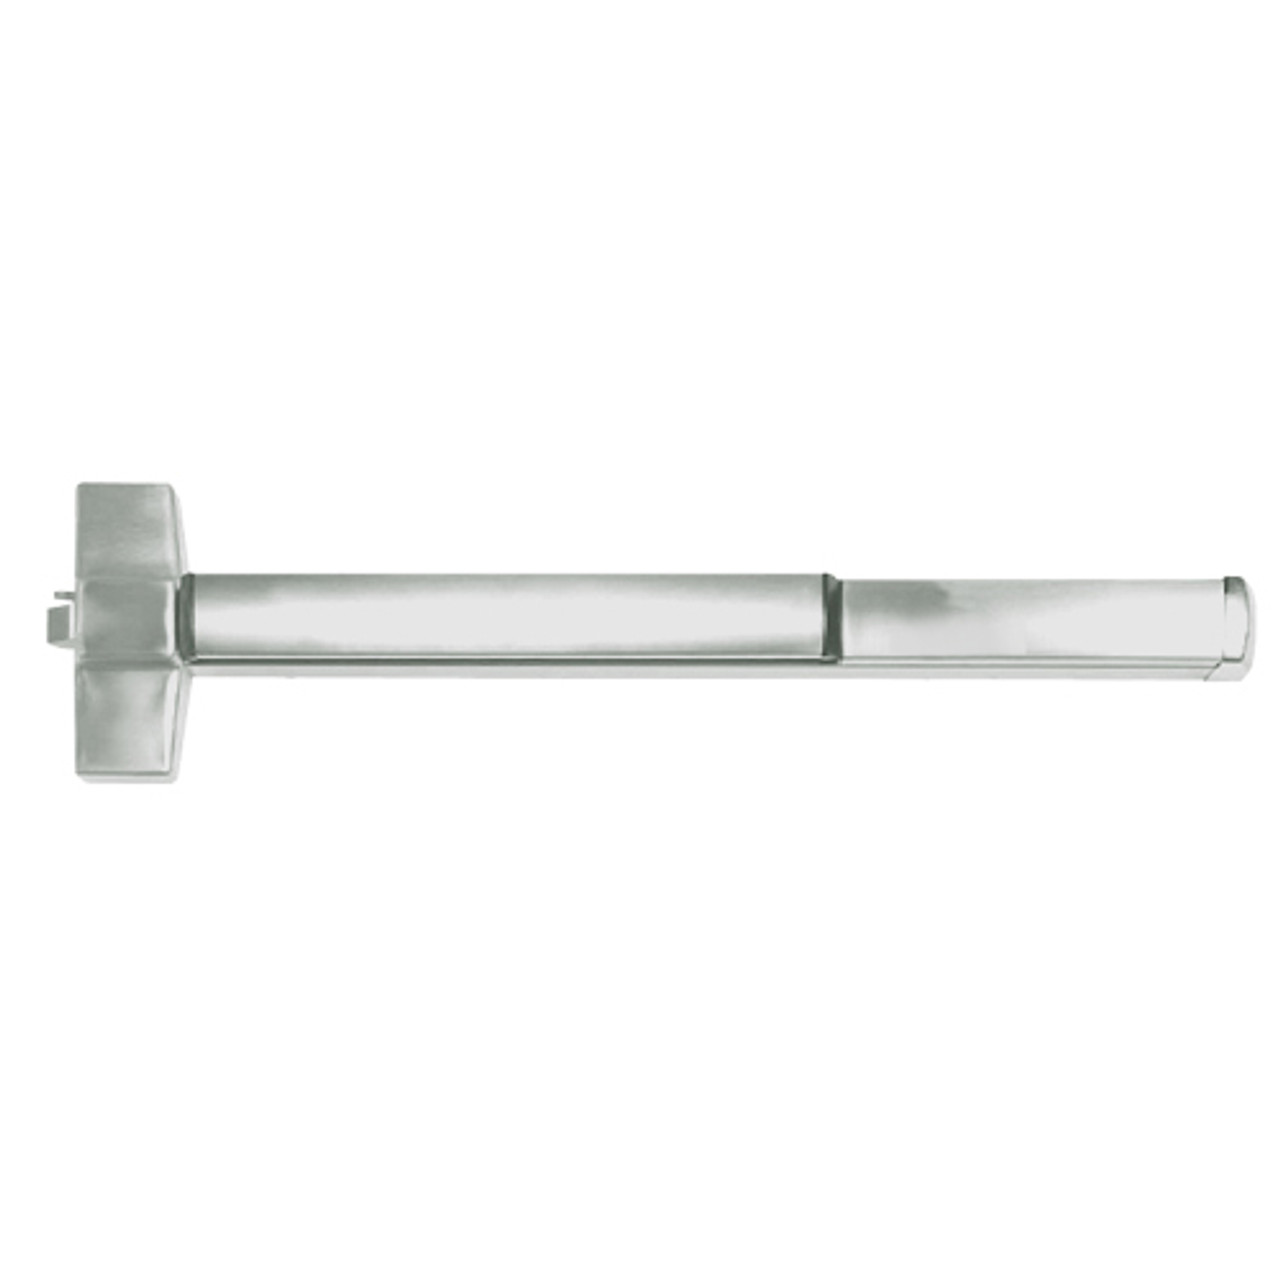 ED5200A-619-W048-MELR-M92 Corbin ED5200 Series Fire Rated Rim Exit Device with Motor Latch Retraction and Touchbar Monitoring in Satin Nickel Finish